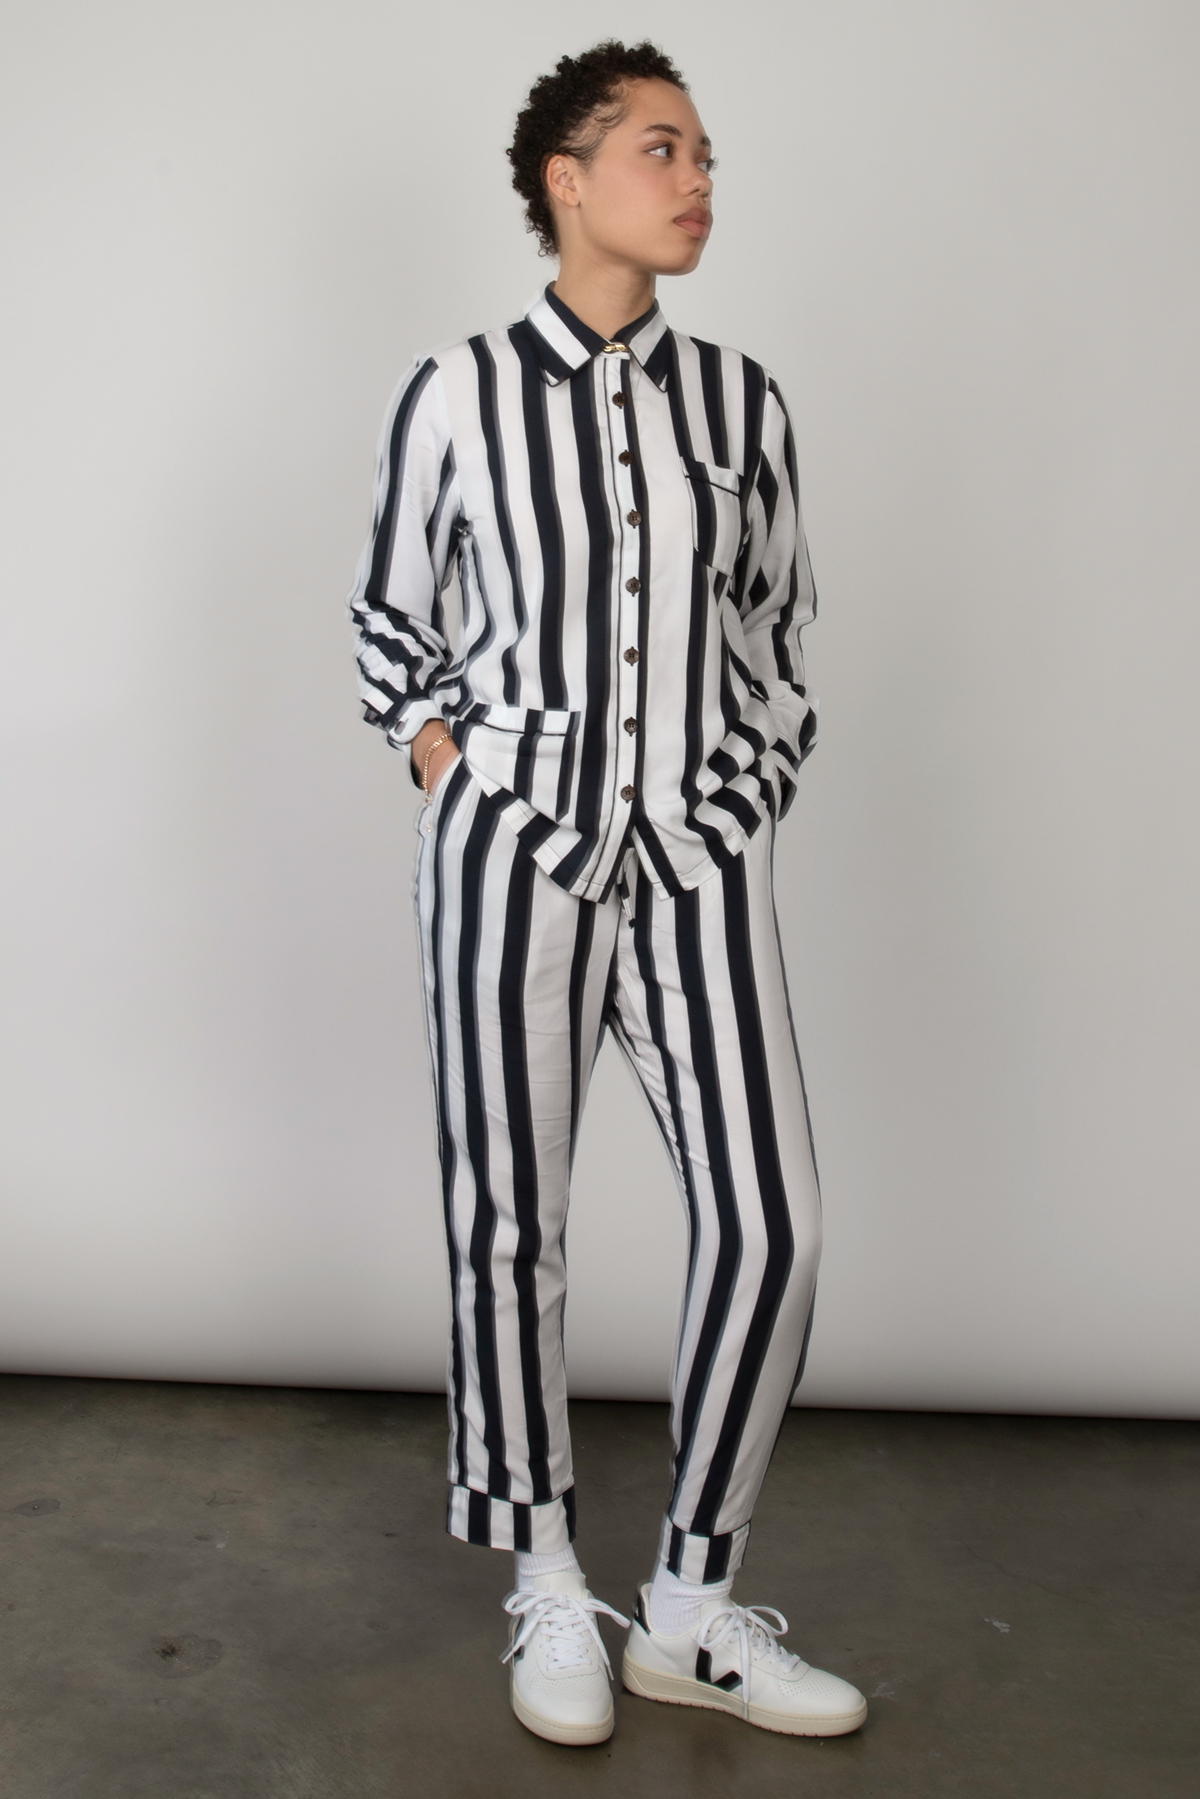 Woman wears a black and white striped long-sleeve shirt and poses in a studio.